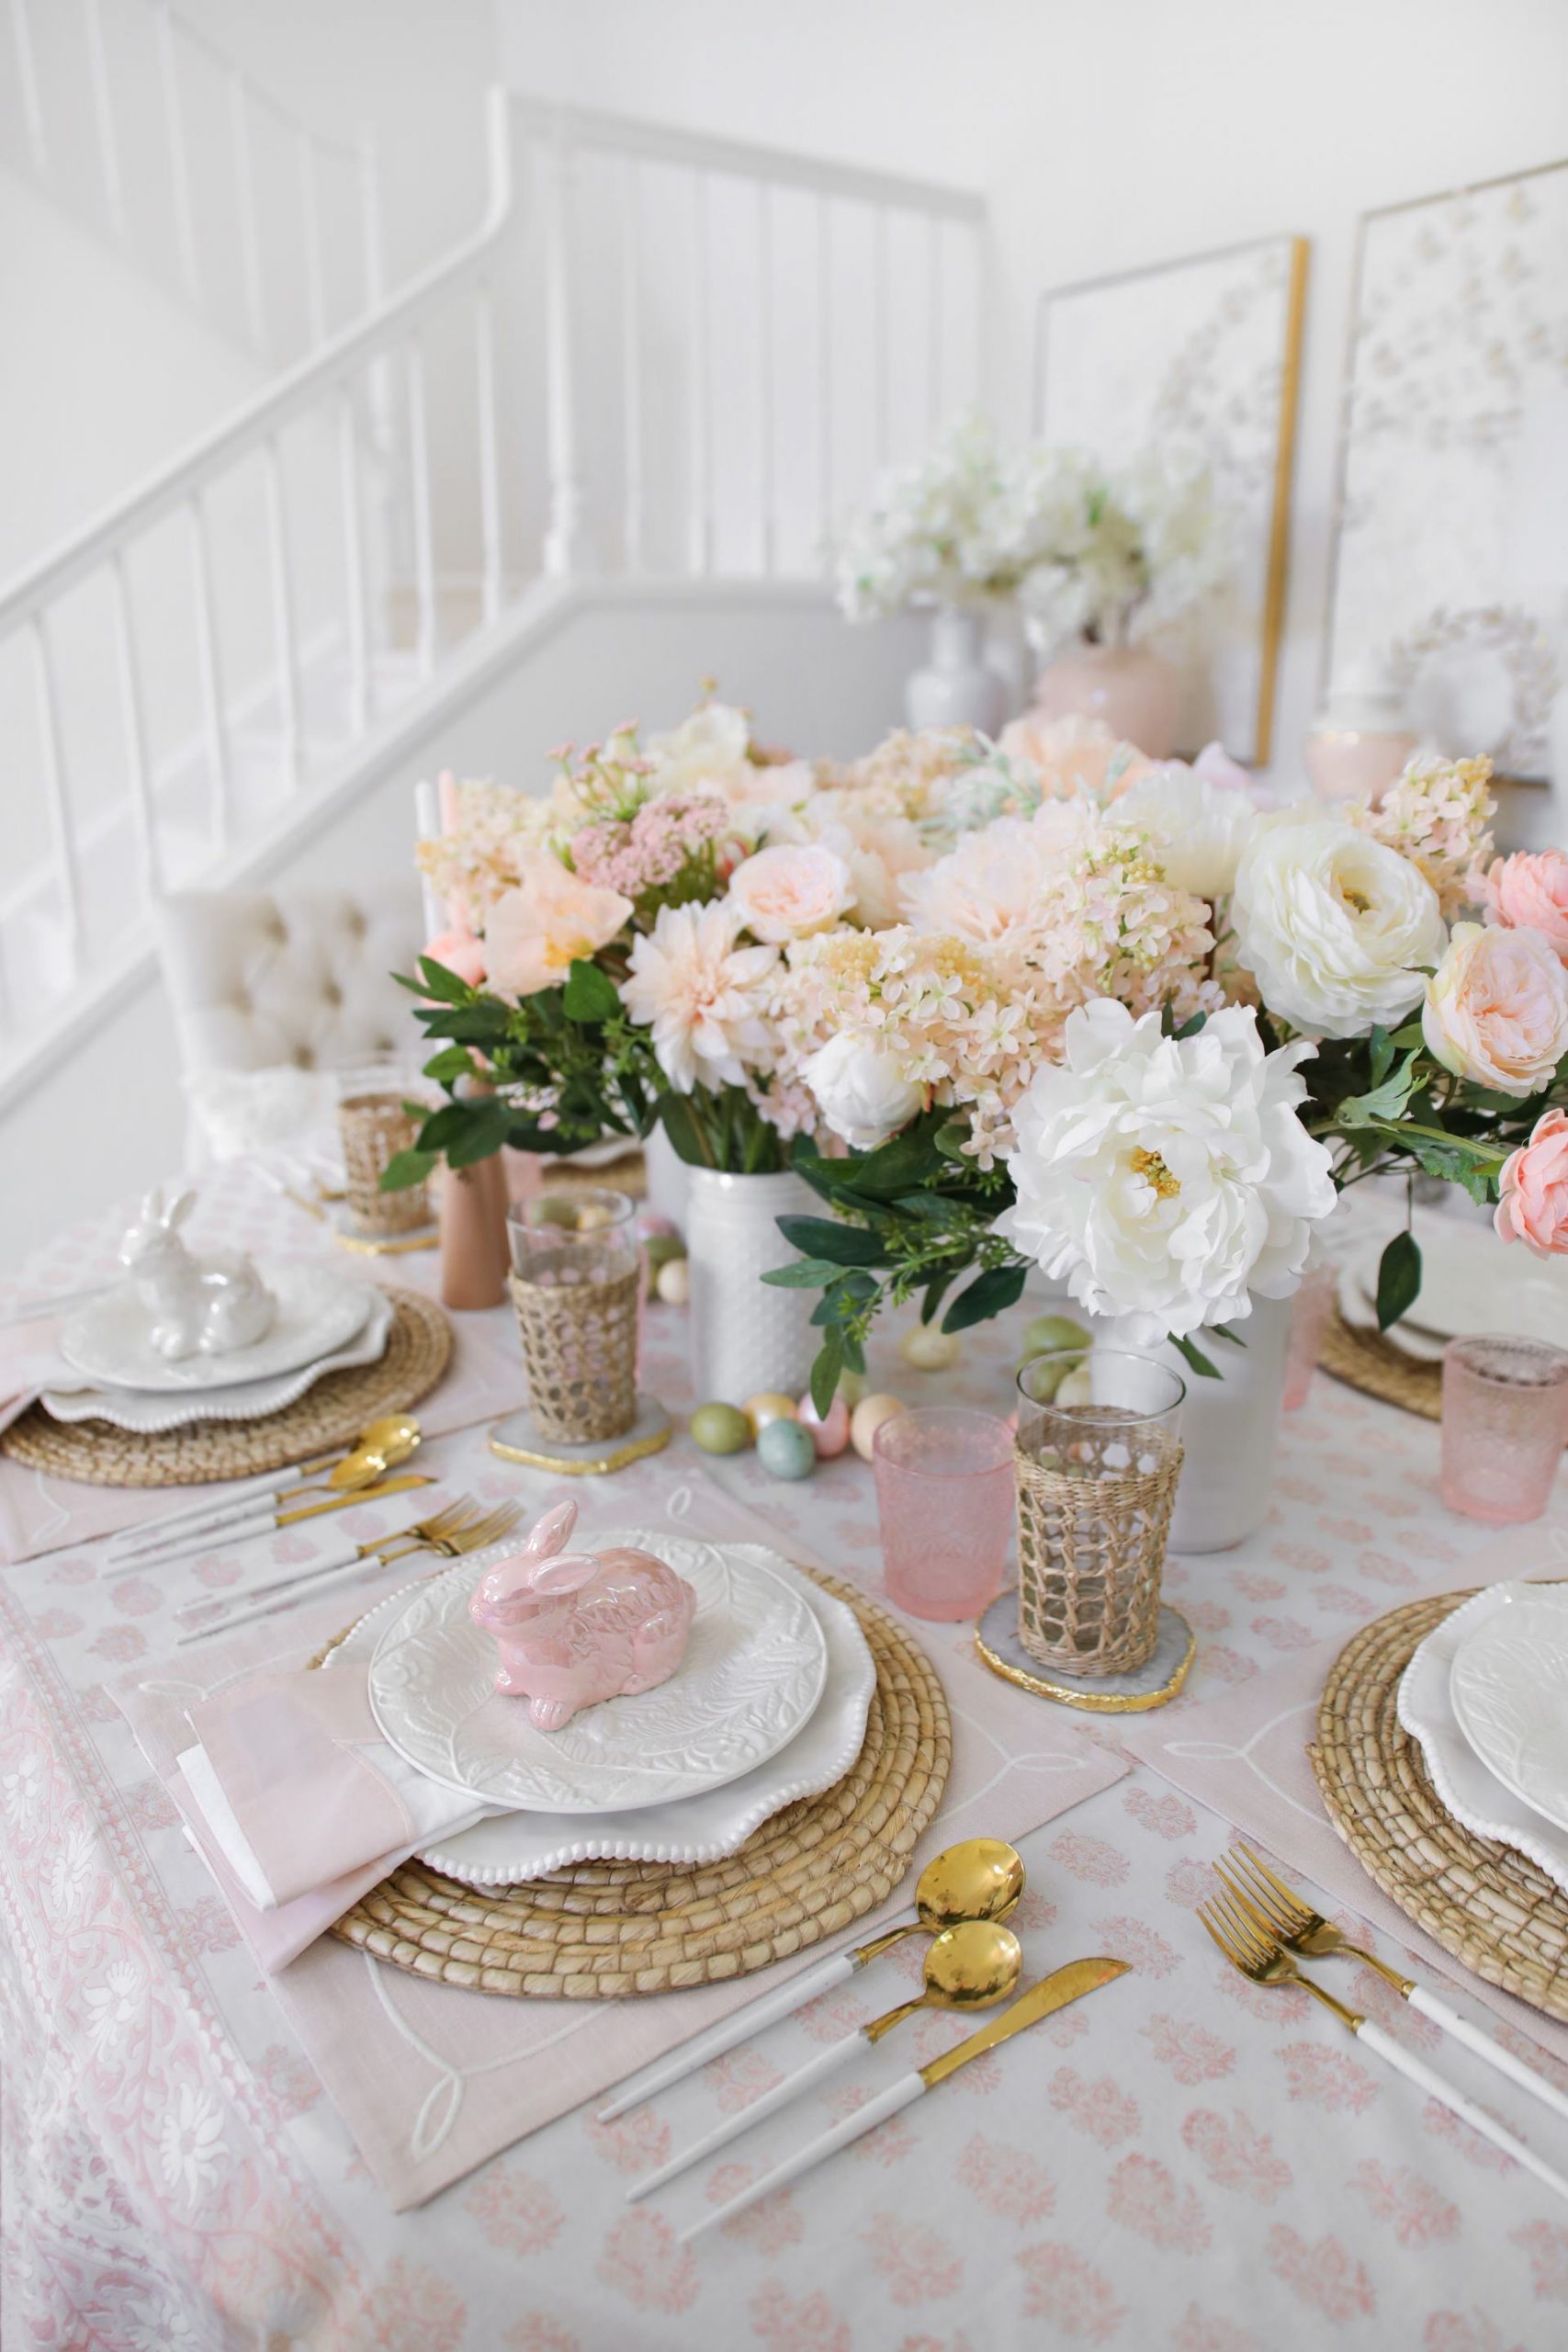 Blush pastel Easter table scape styling ideas, by Lombard & Fifth blogger Veronica Levy.